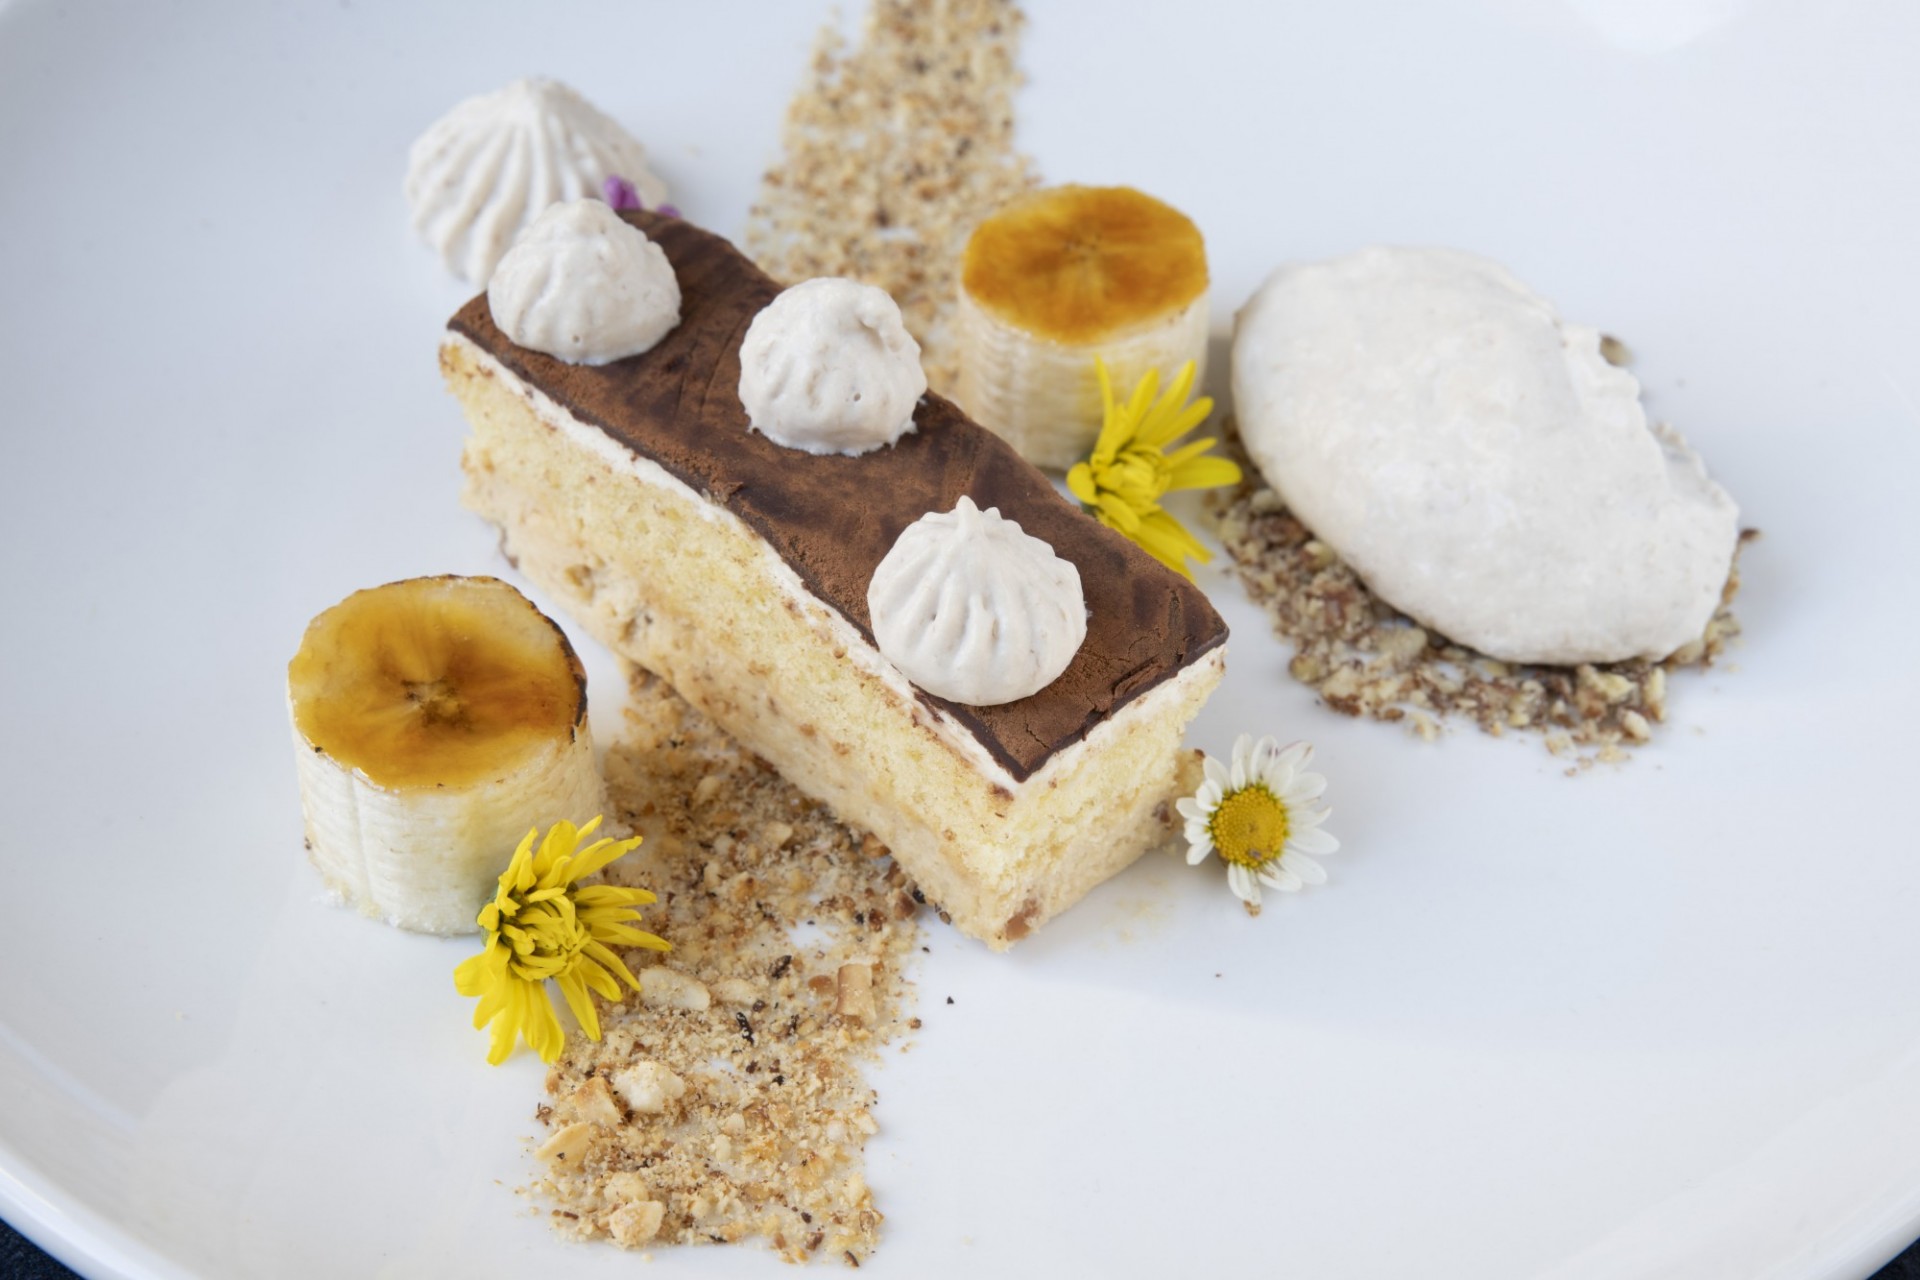 Rectangular slice of tiramisu sits on a a bed of cake crumbs on a white plate. The plat is decorated with yellow and white flowers and banana slices.